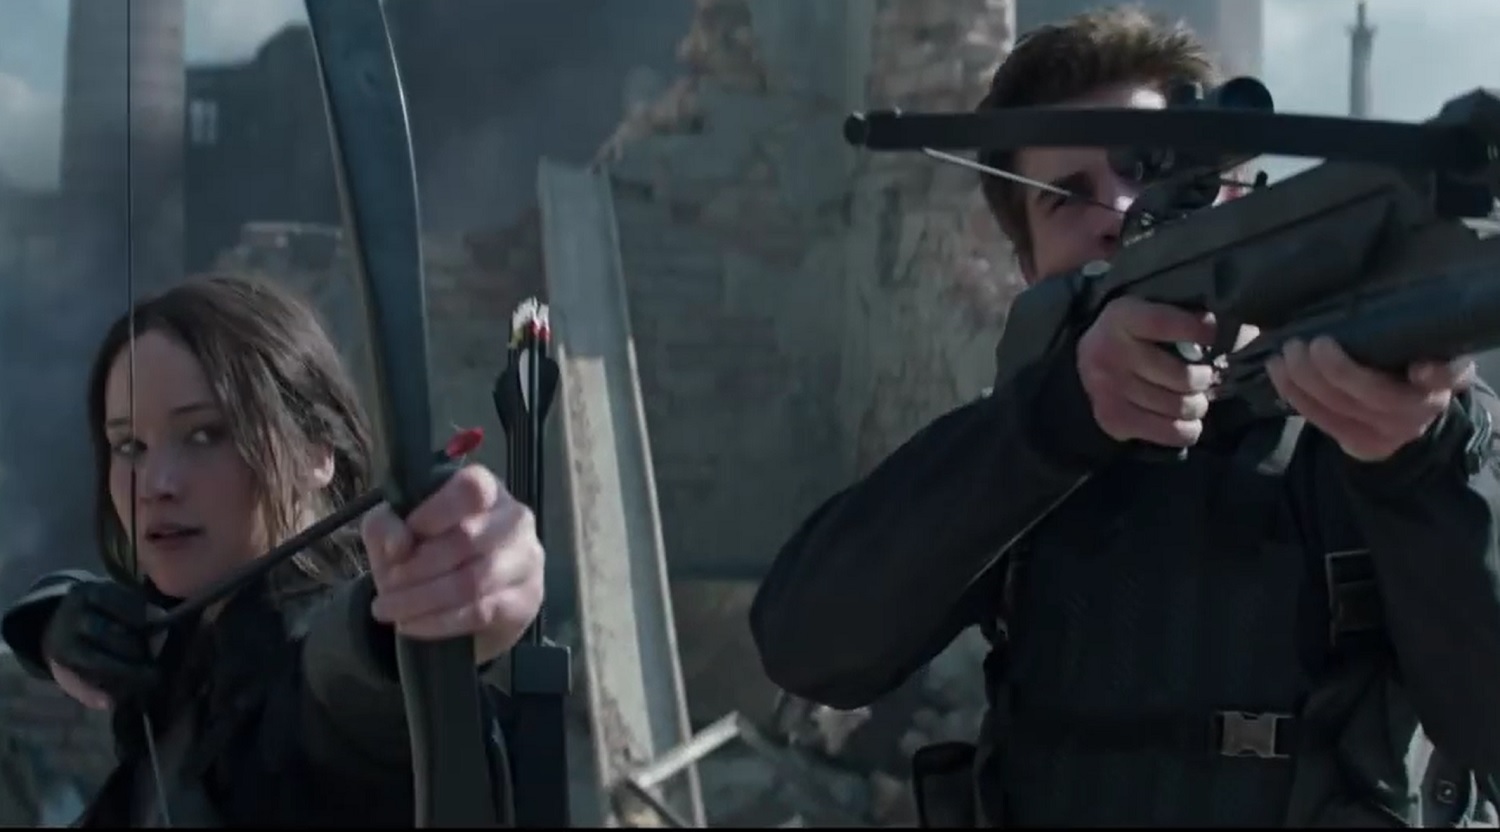 11 GIFs from The Hunger Games teaser